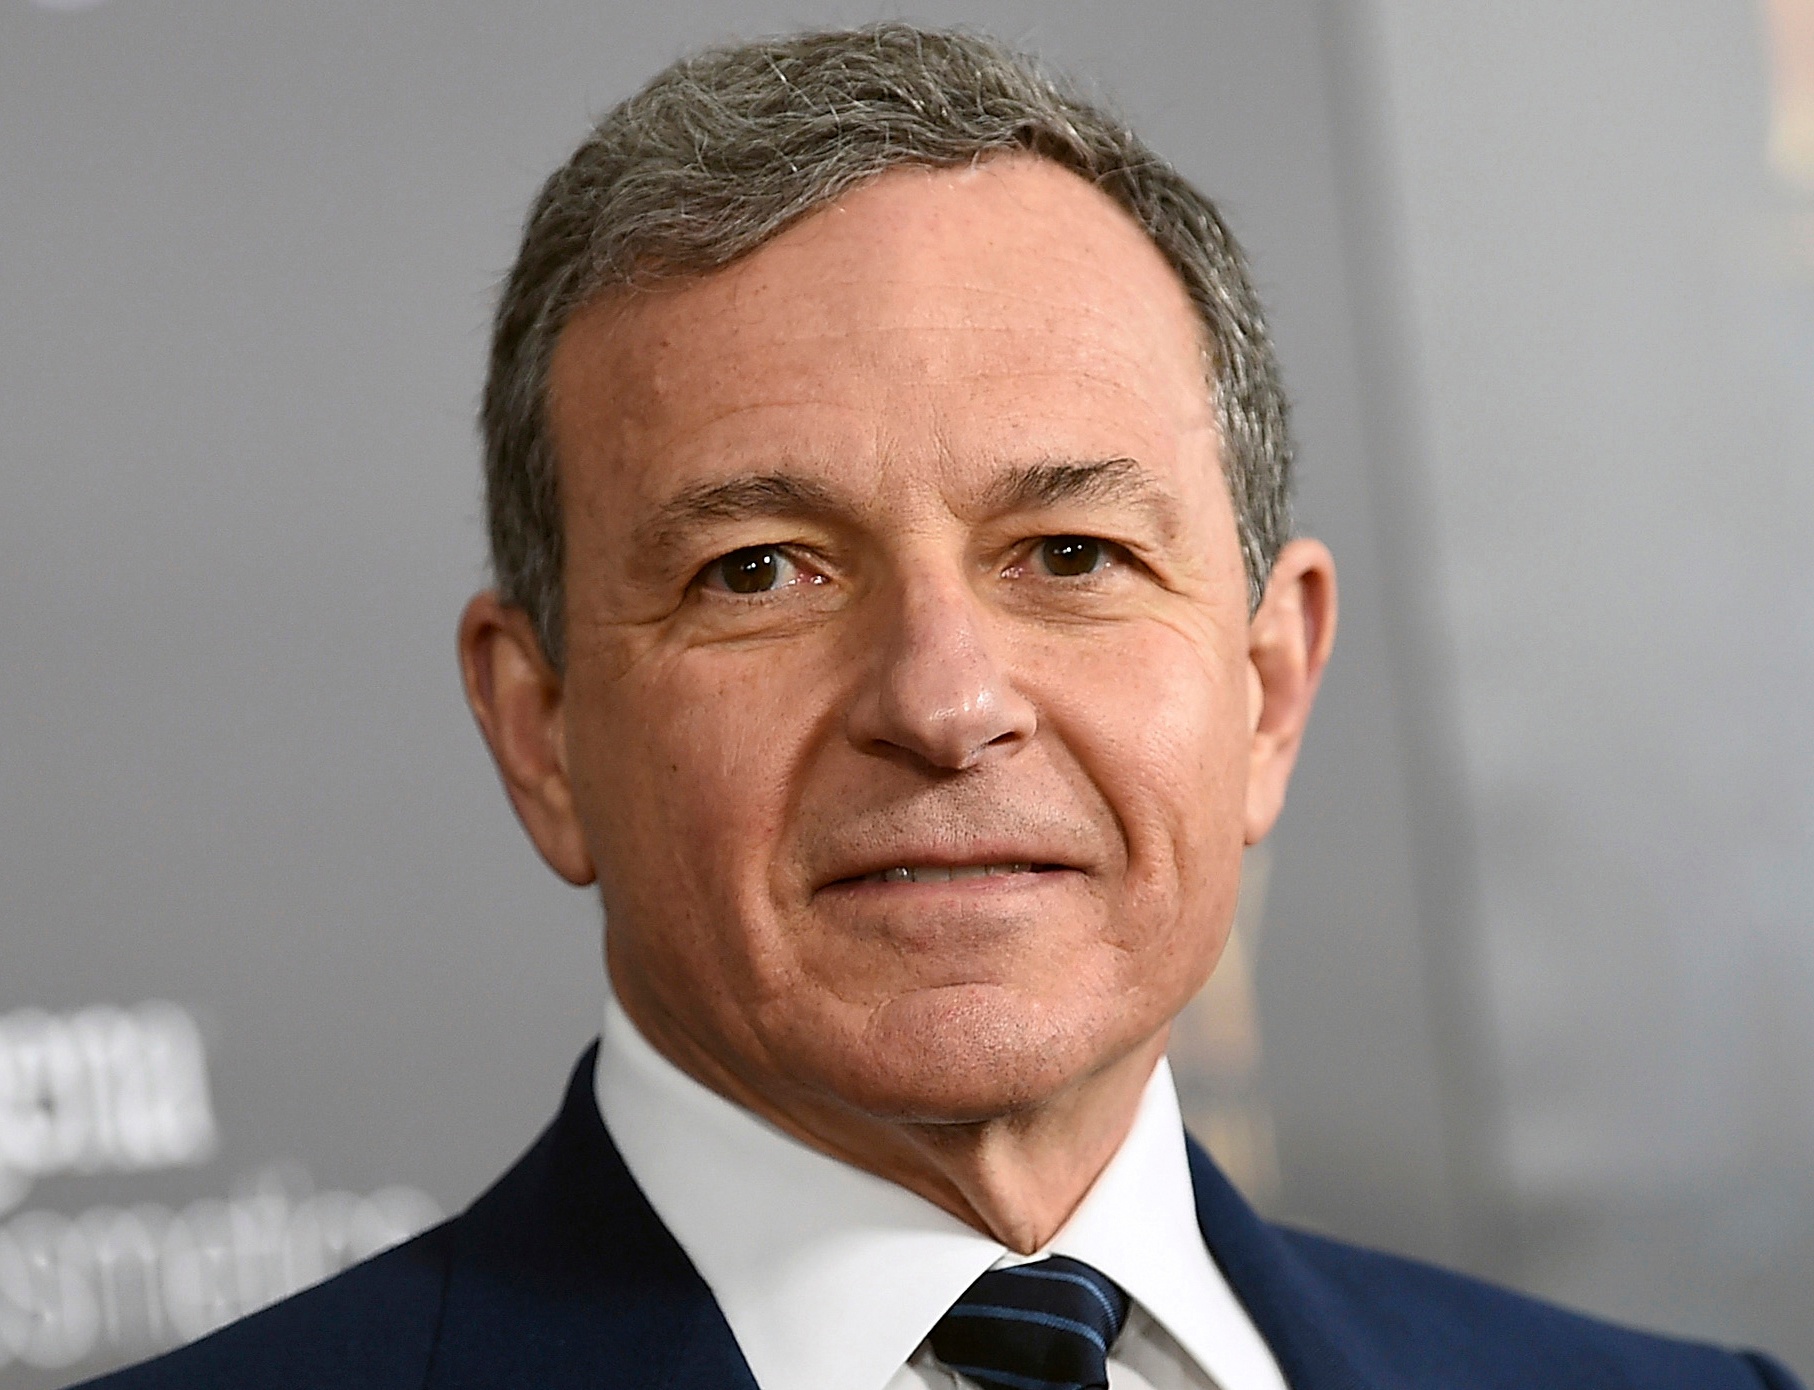 Disney CEO Bob Iger said that the company will be capping its yearly output of Marvel movies and TV shows in an effort to emphasize quality over quantity.